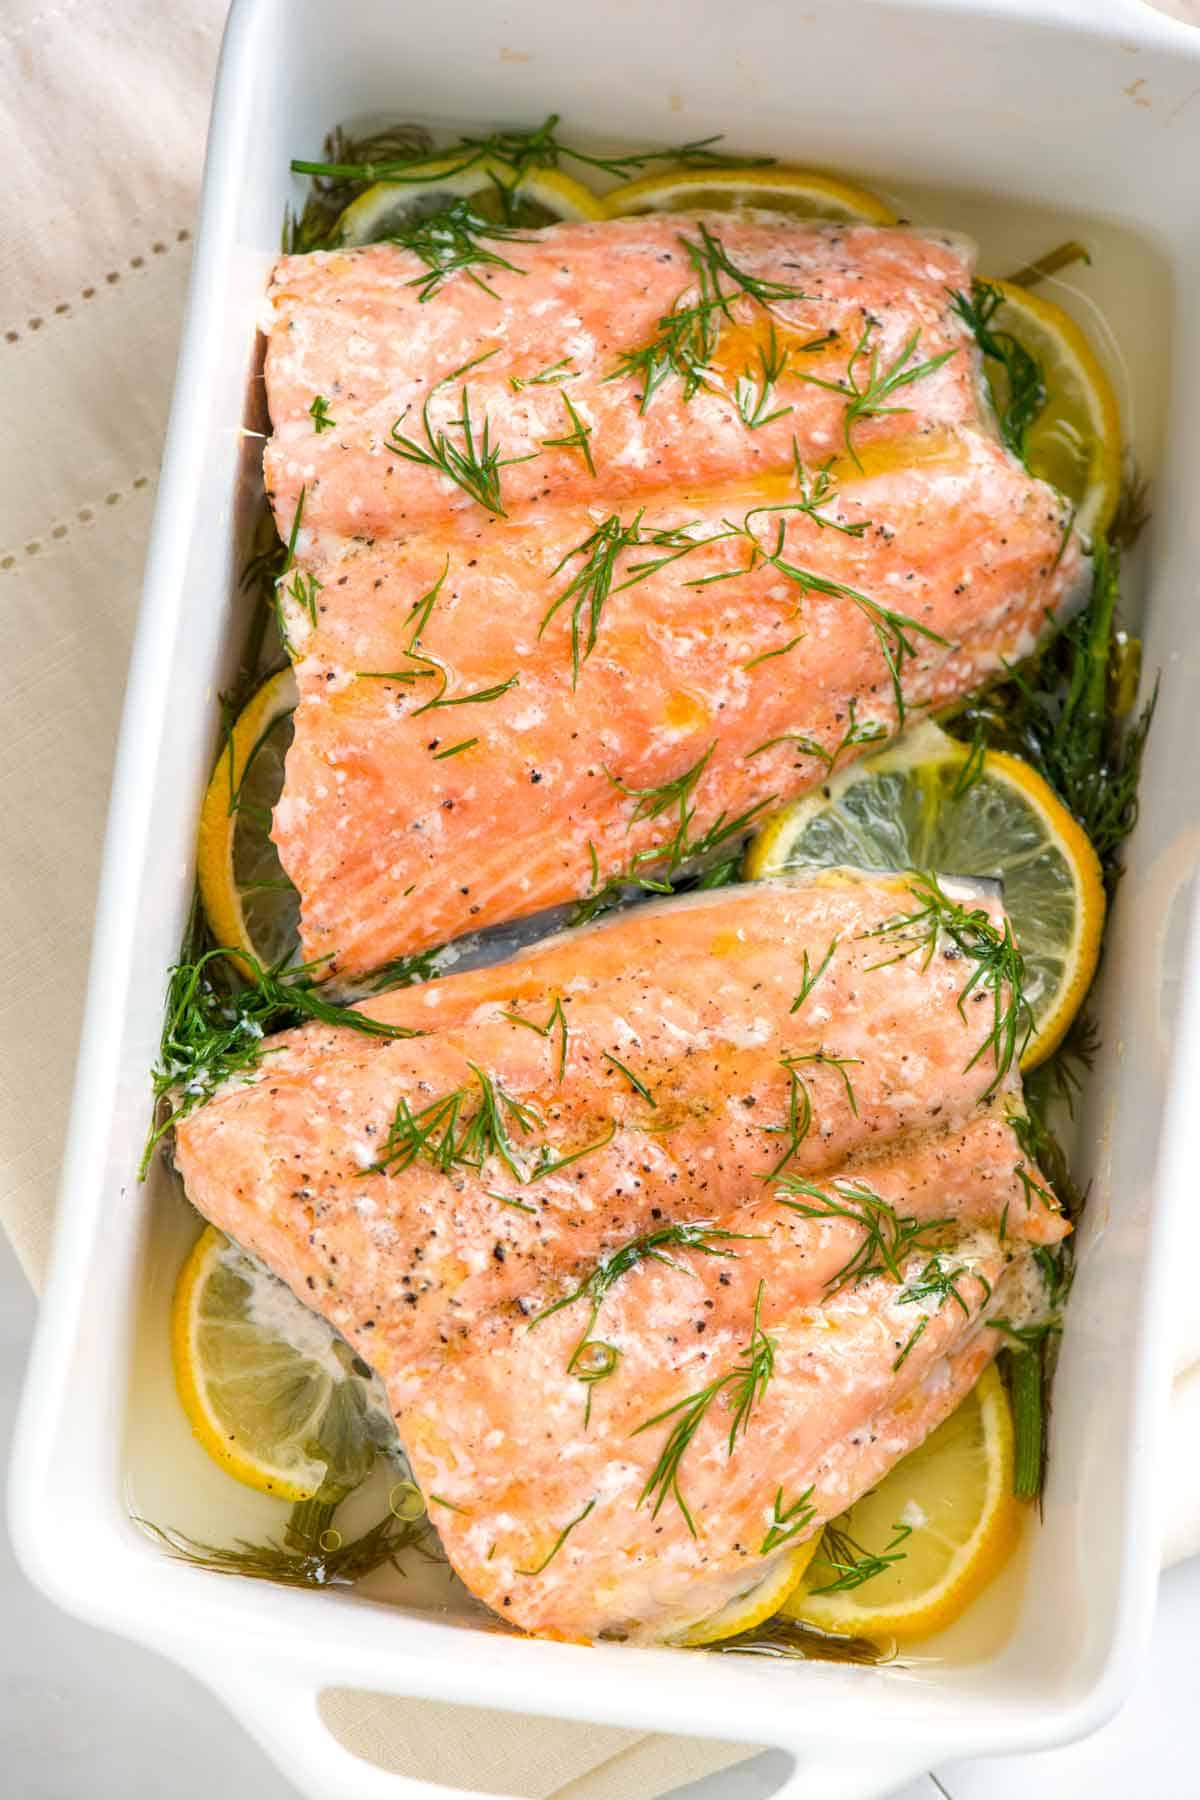 baked salmon done temp